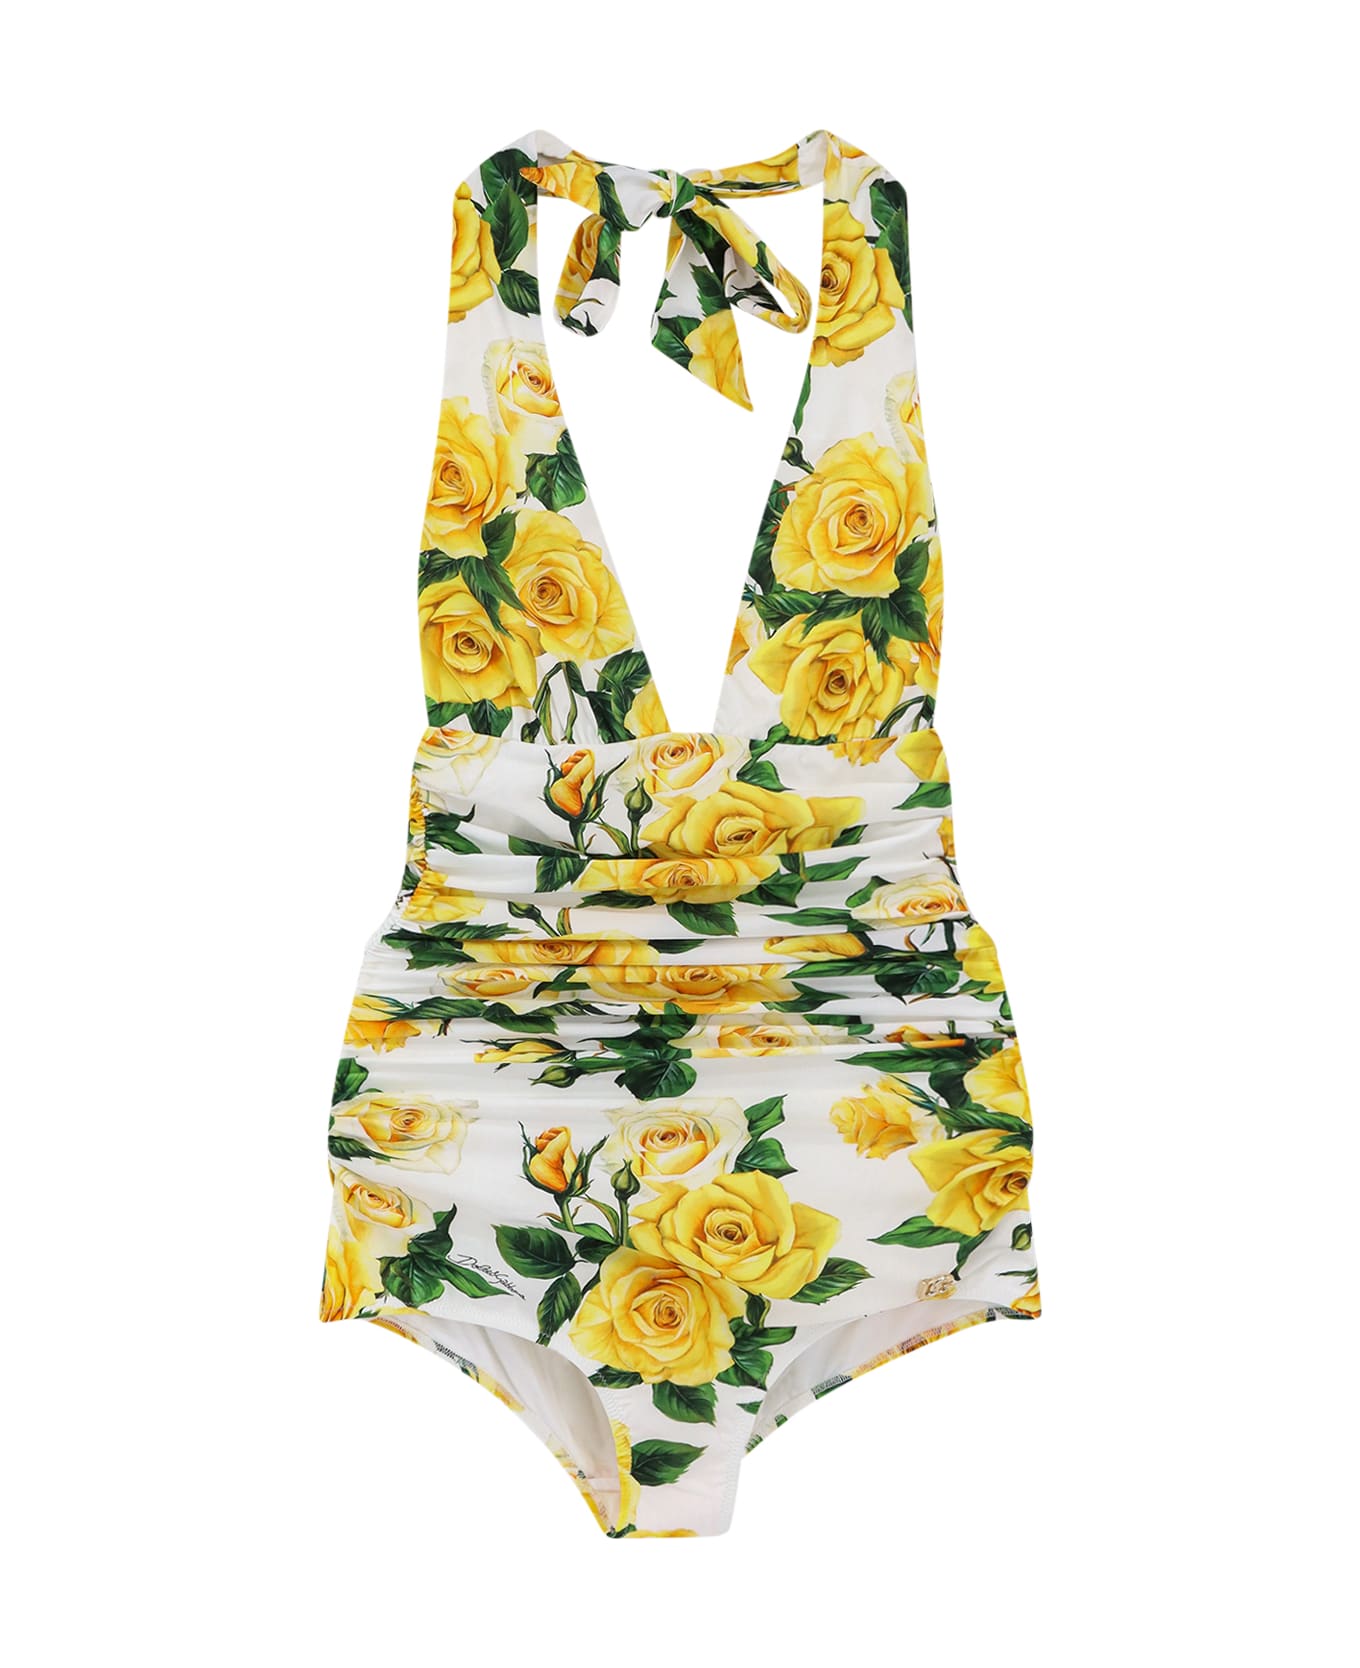 Dolce & Gabbana One-piece Swimsuits With Flower Print - Yellow